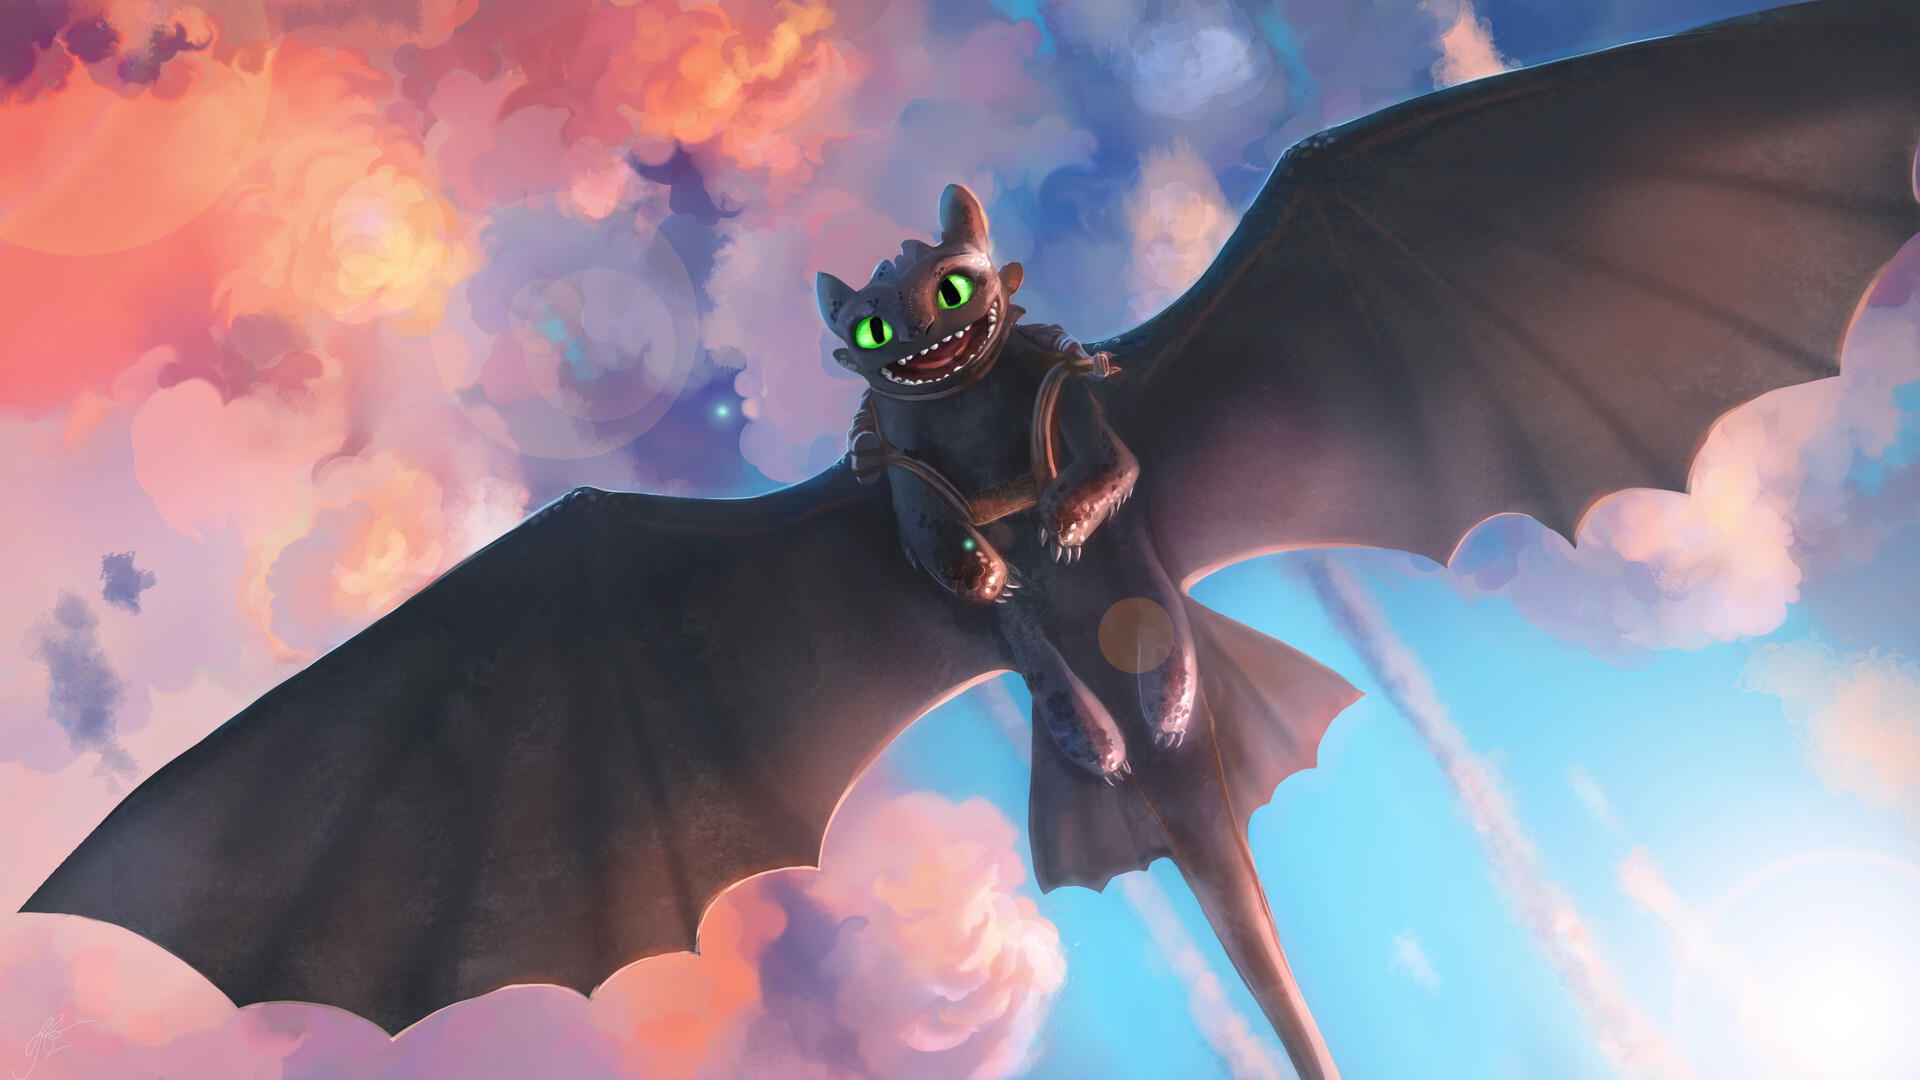 Cute Toothless Wallpapers